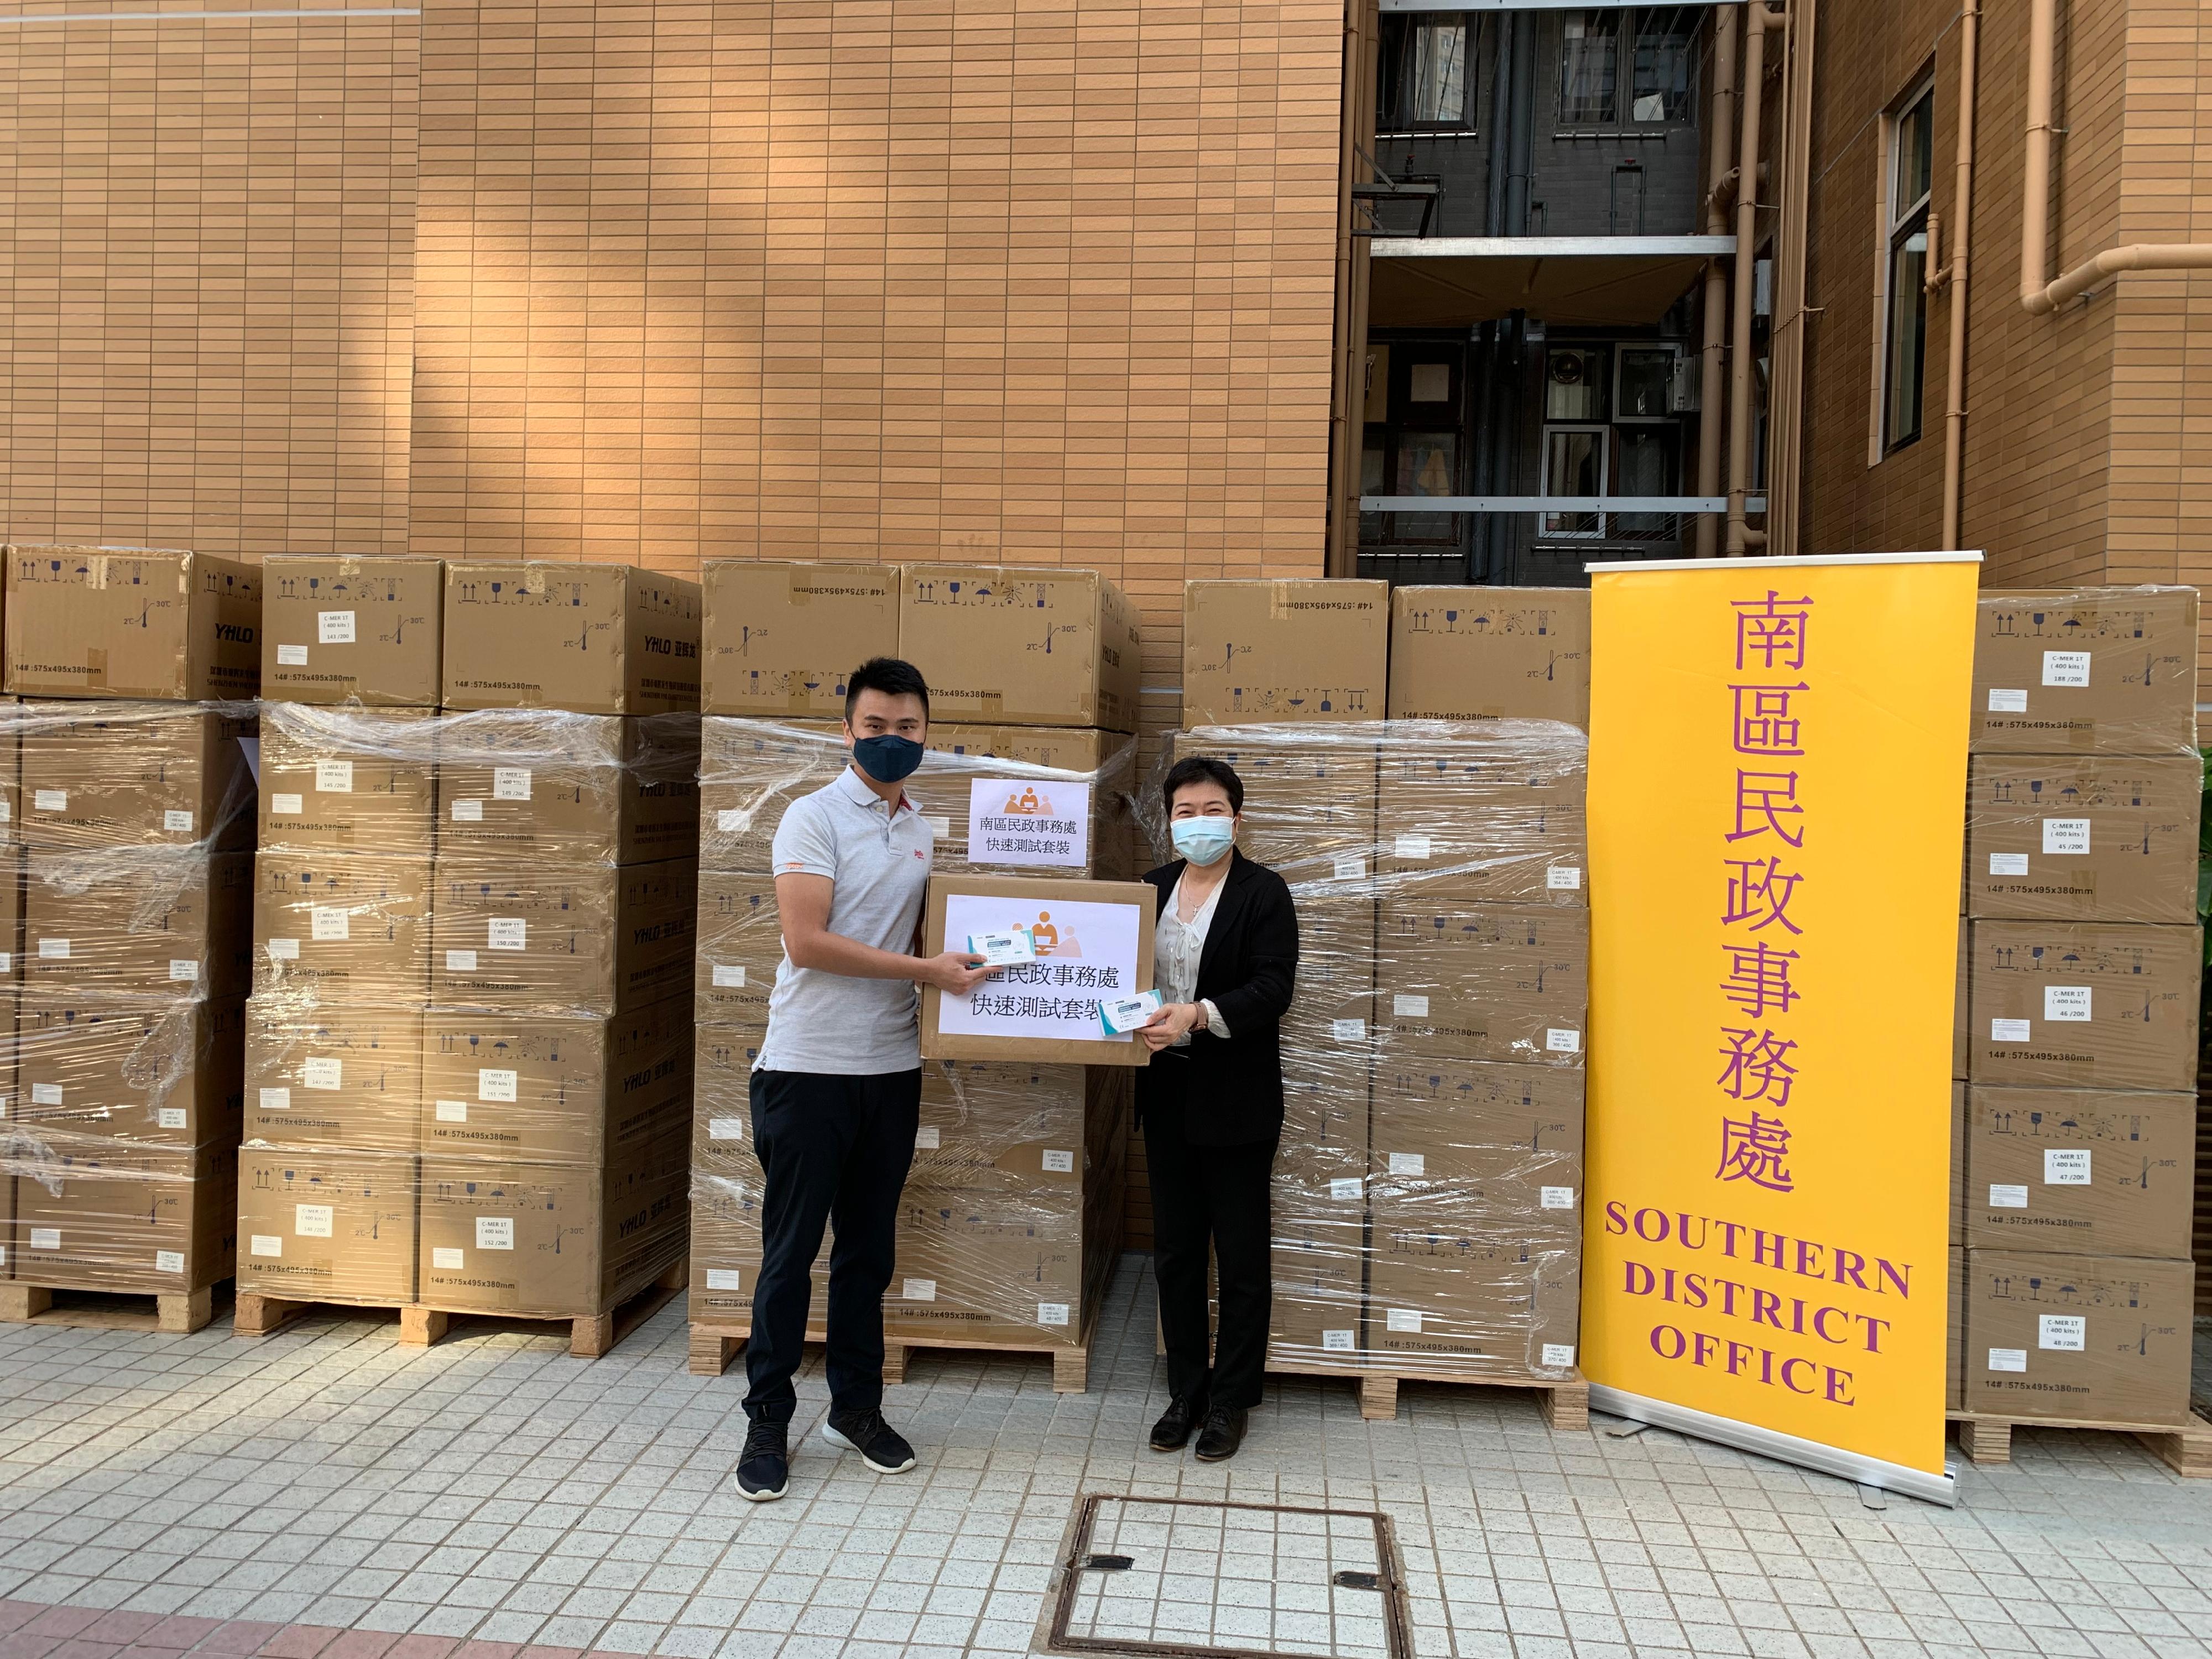 The Southern District Office today (May 4) distributed COVID-19 rapid test kits to households, cleansing workers and property management staff living and working in Chi Fu Fa Yuen for voluntary testing through the property management company.